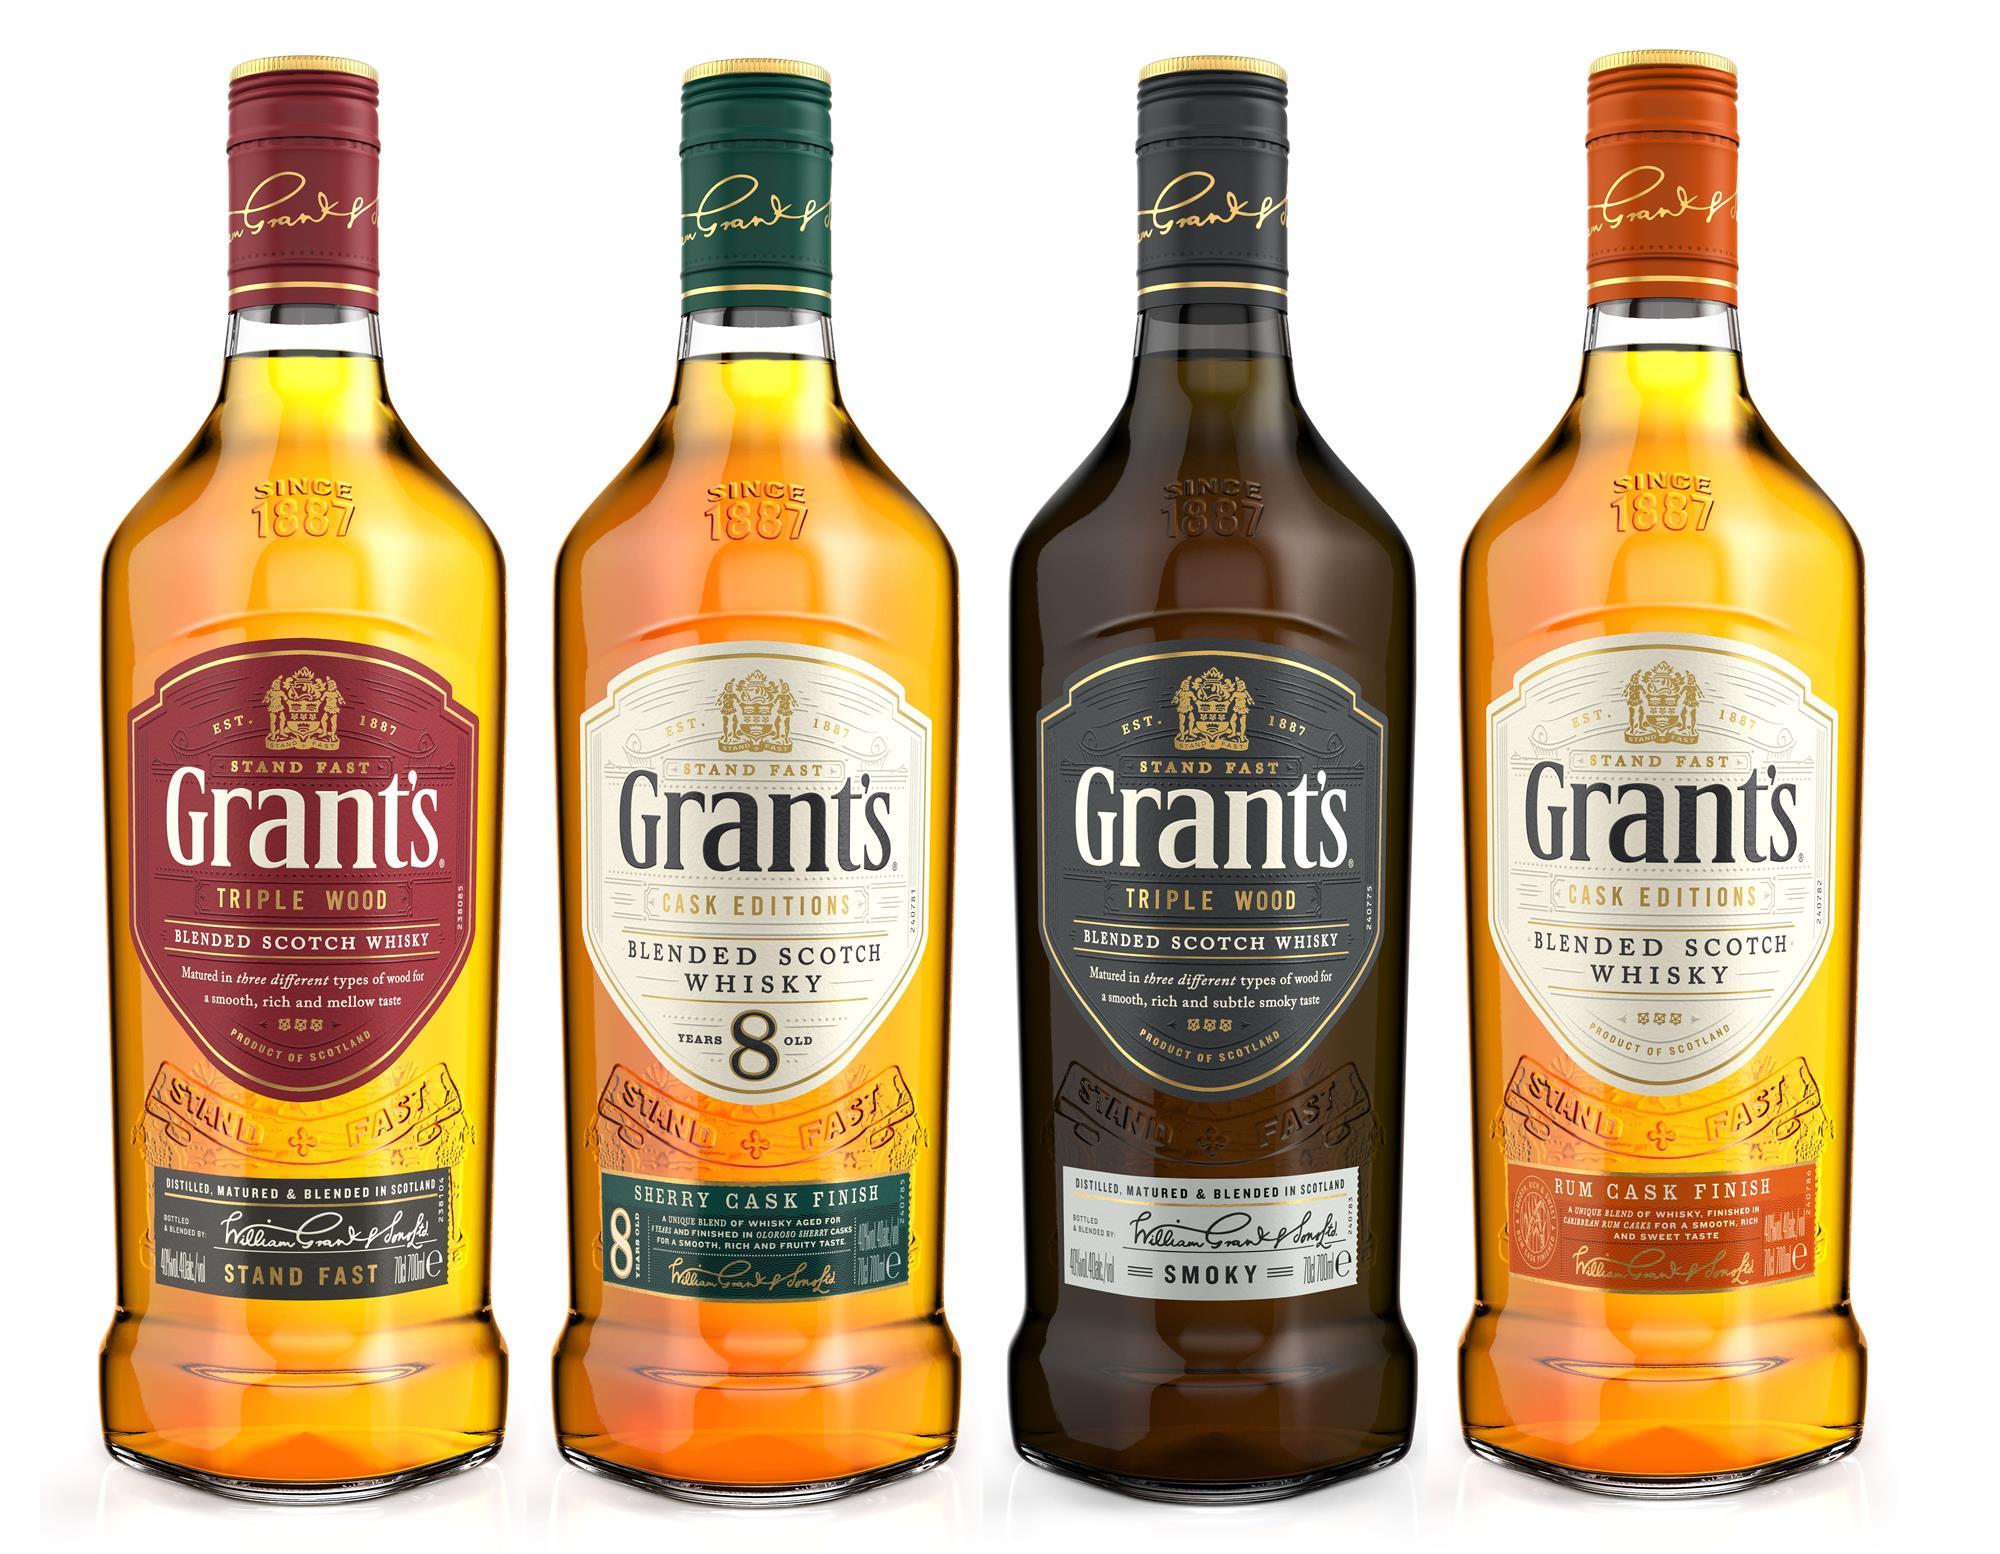 Grant's whisky gets new name and consolidated range Product News